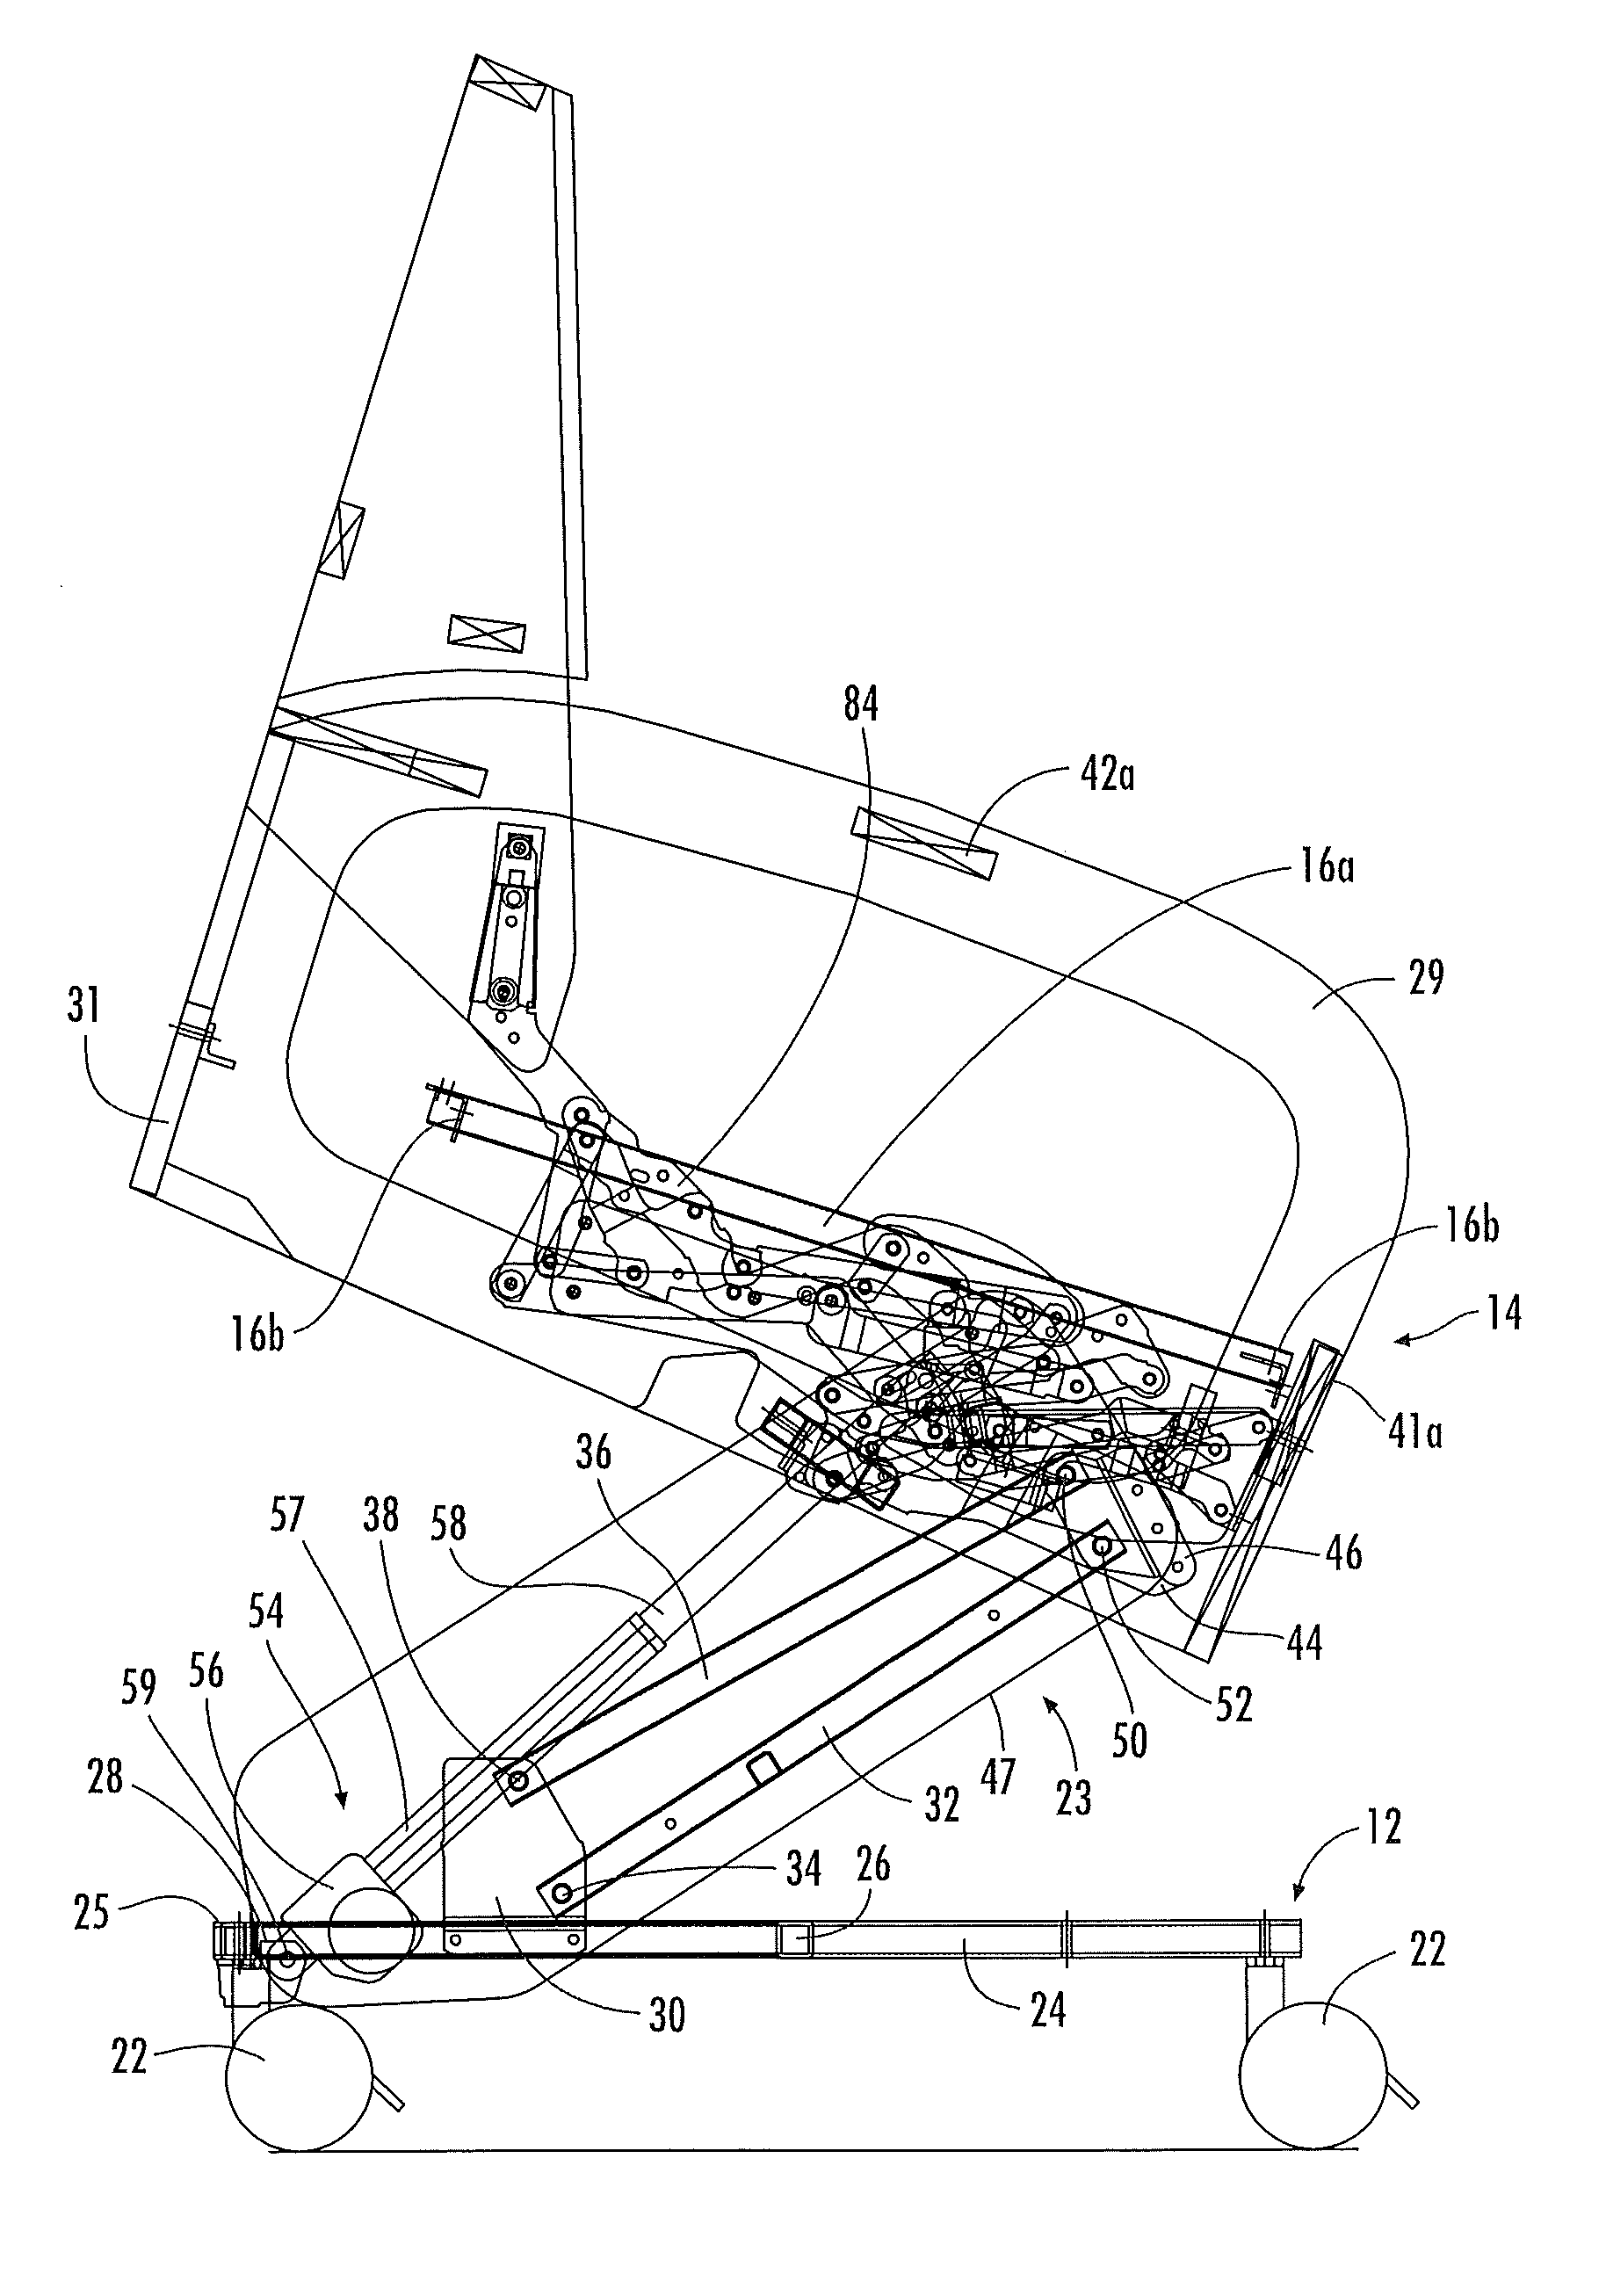 Power-assisted reclining lift chair with single power actuator